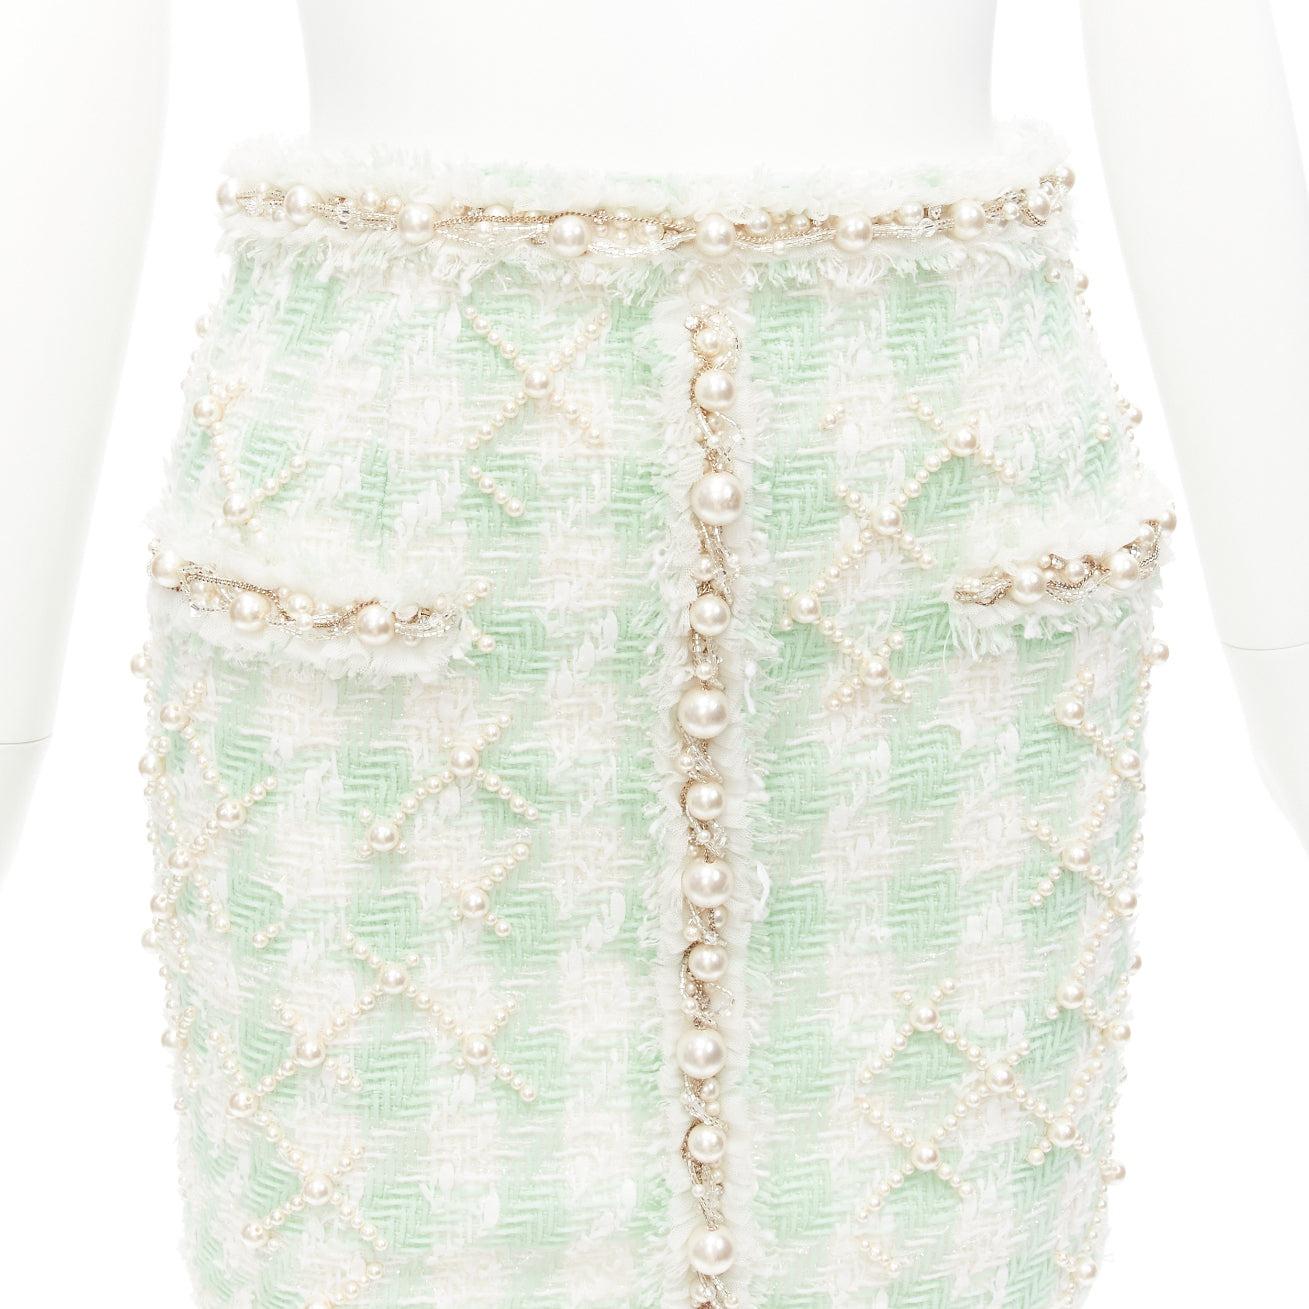 BALMAIN 2023 green white tweed pearl embellished preppy mini skirt FR34 XS
Reference: AAWC/A00541
Brand: Balmain
Designer: Olivier Rousteing
Collection: 2023 SS
Material: Polyamide, Blend
Color: Green, White
Pattern: Tweed
Closure: Zip
Lining: White